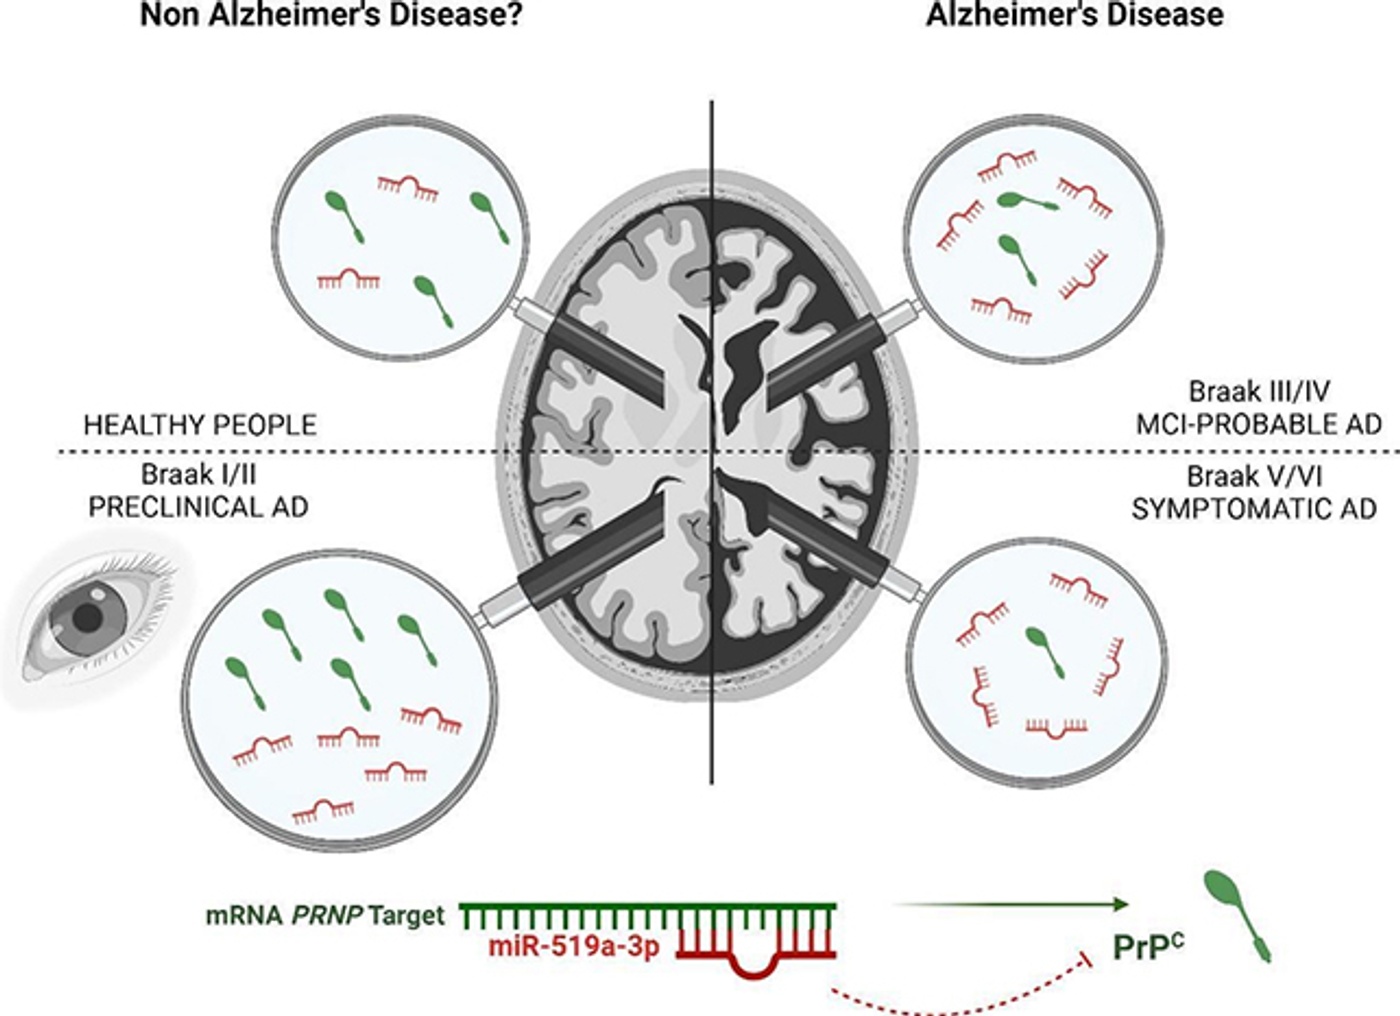 New Biomarker Discovery for Early Diagnosis of Alzheimer's Disease